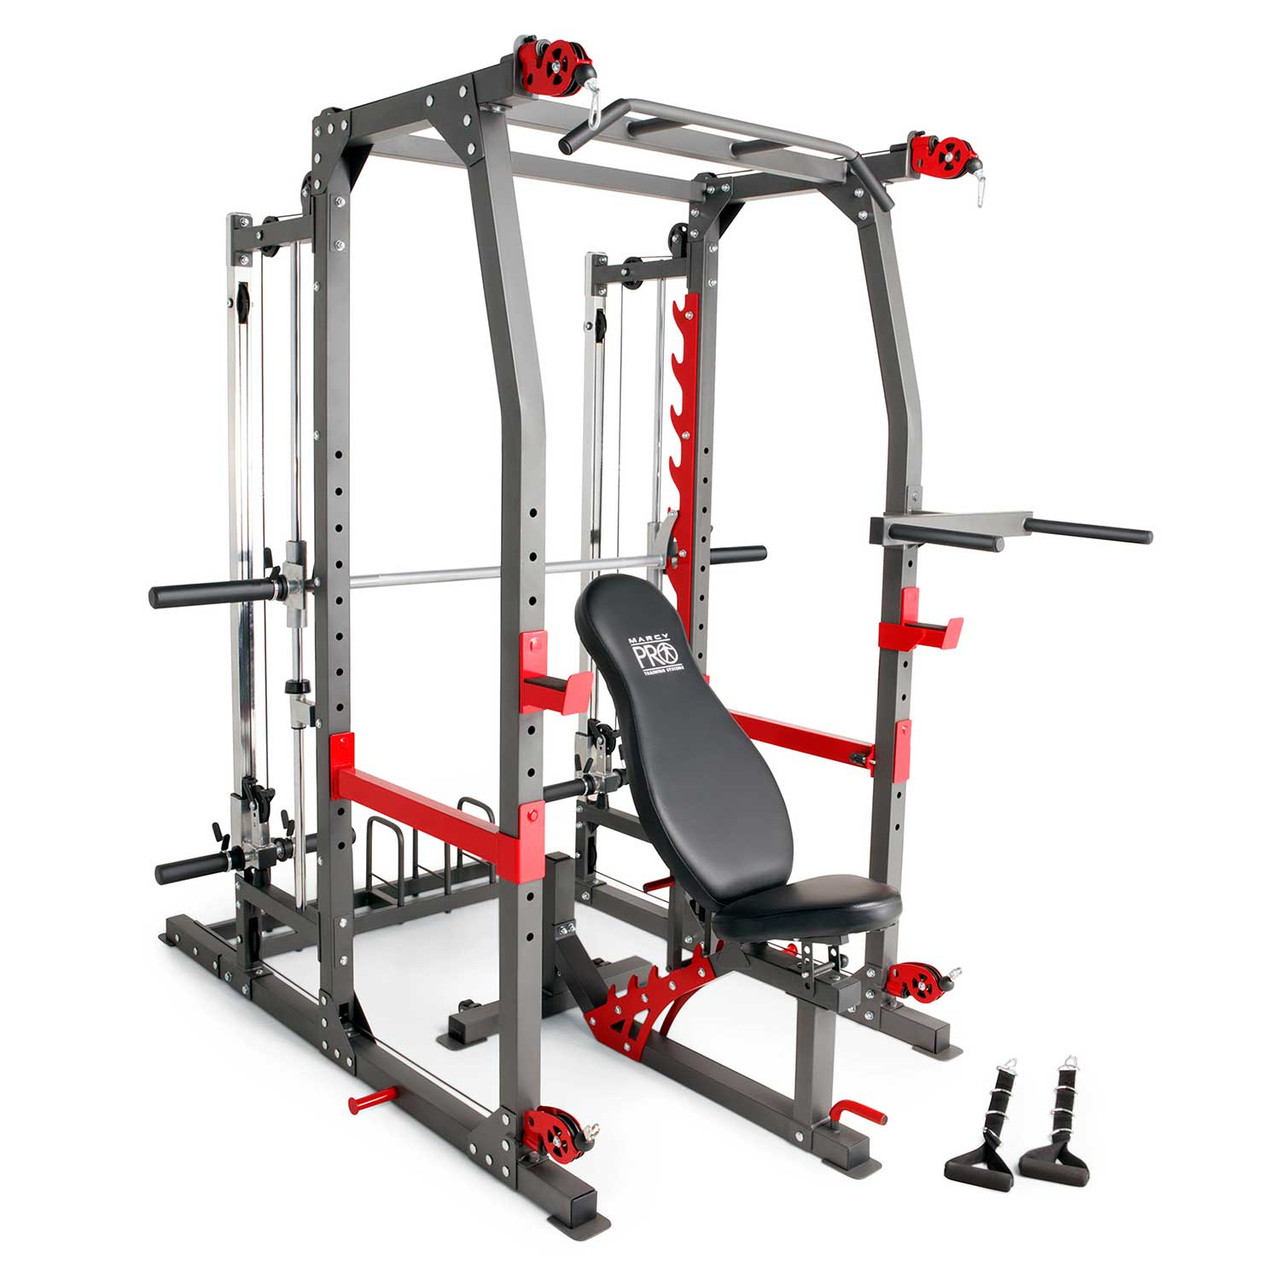 Choosing the Best Smith Machine for Weightlifting